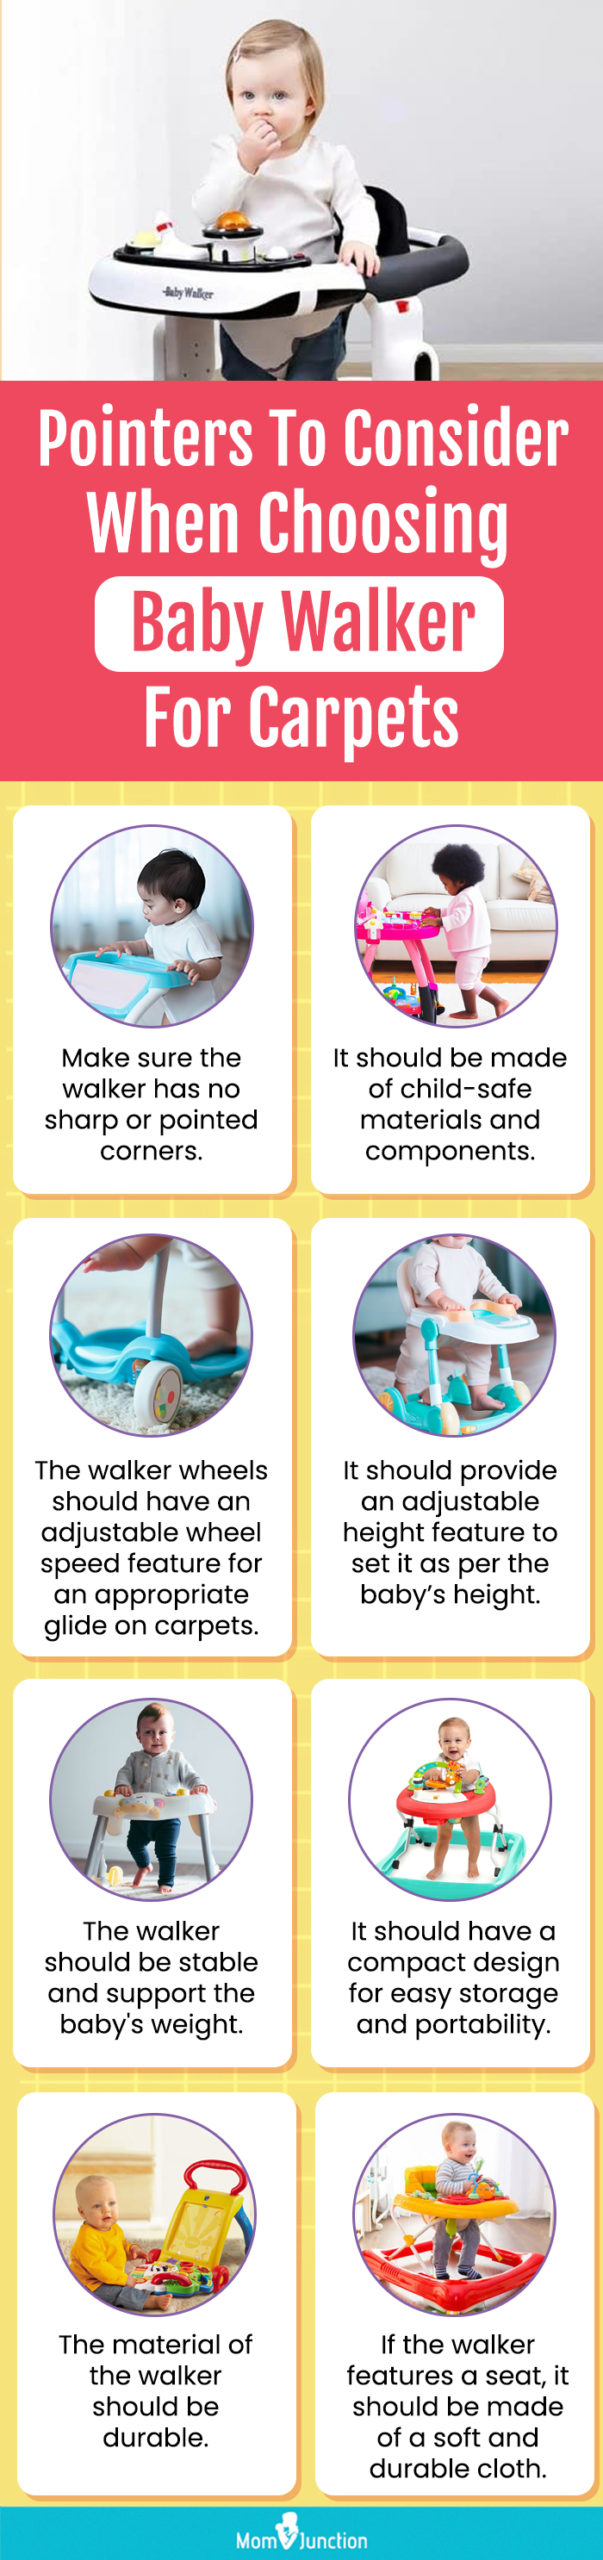 Pointers To Consider When Choosing Baby Walker For Carpets (infographic)